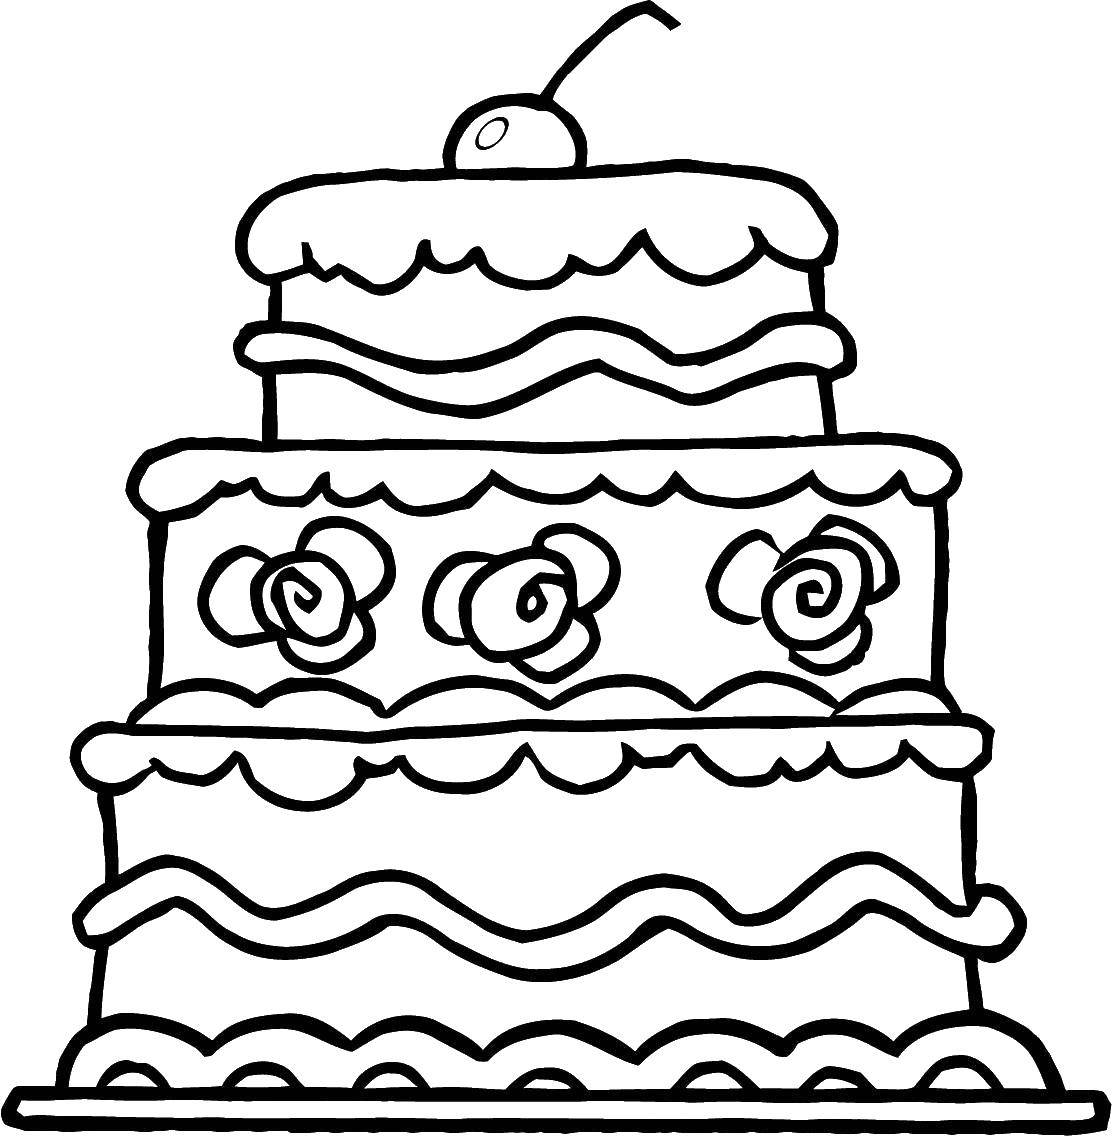 Coloring Cake. Category cakes. Tags:  the cake.